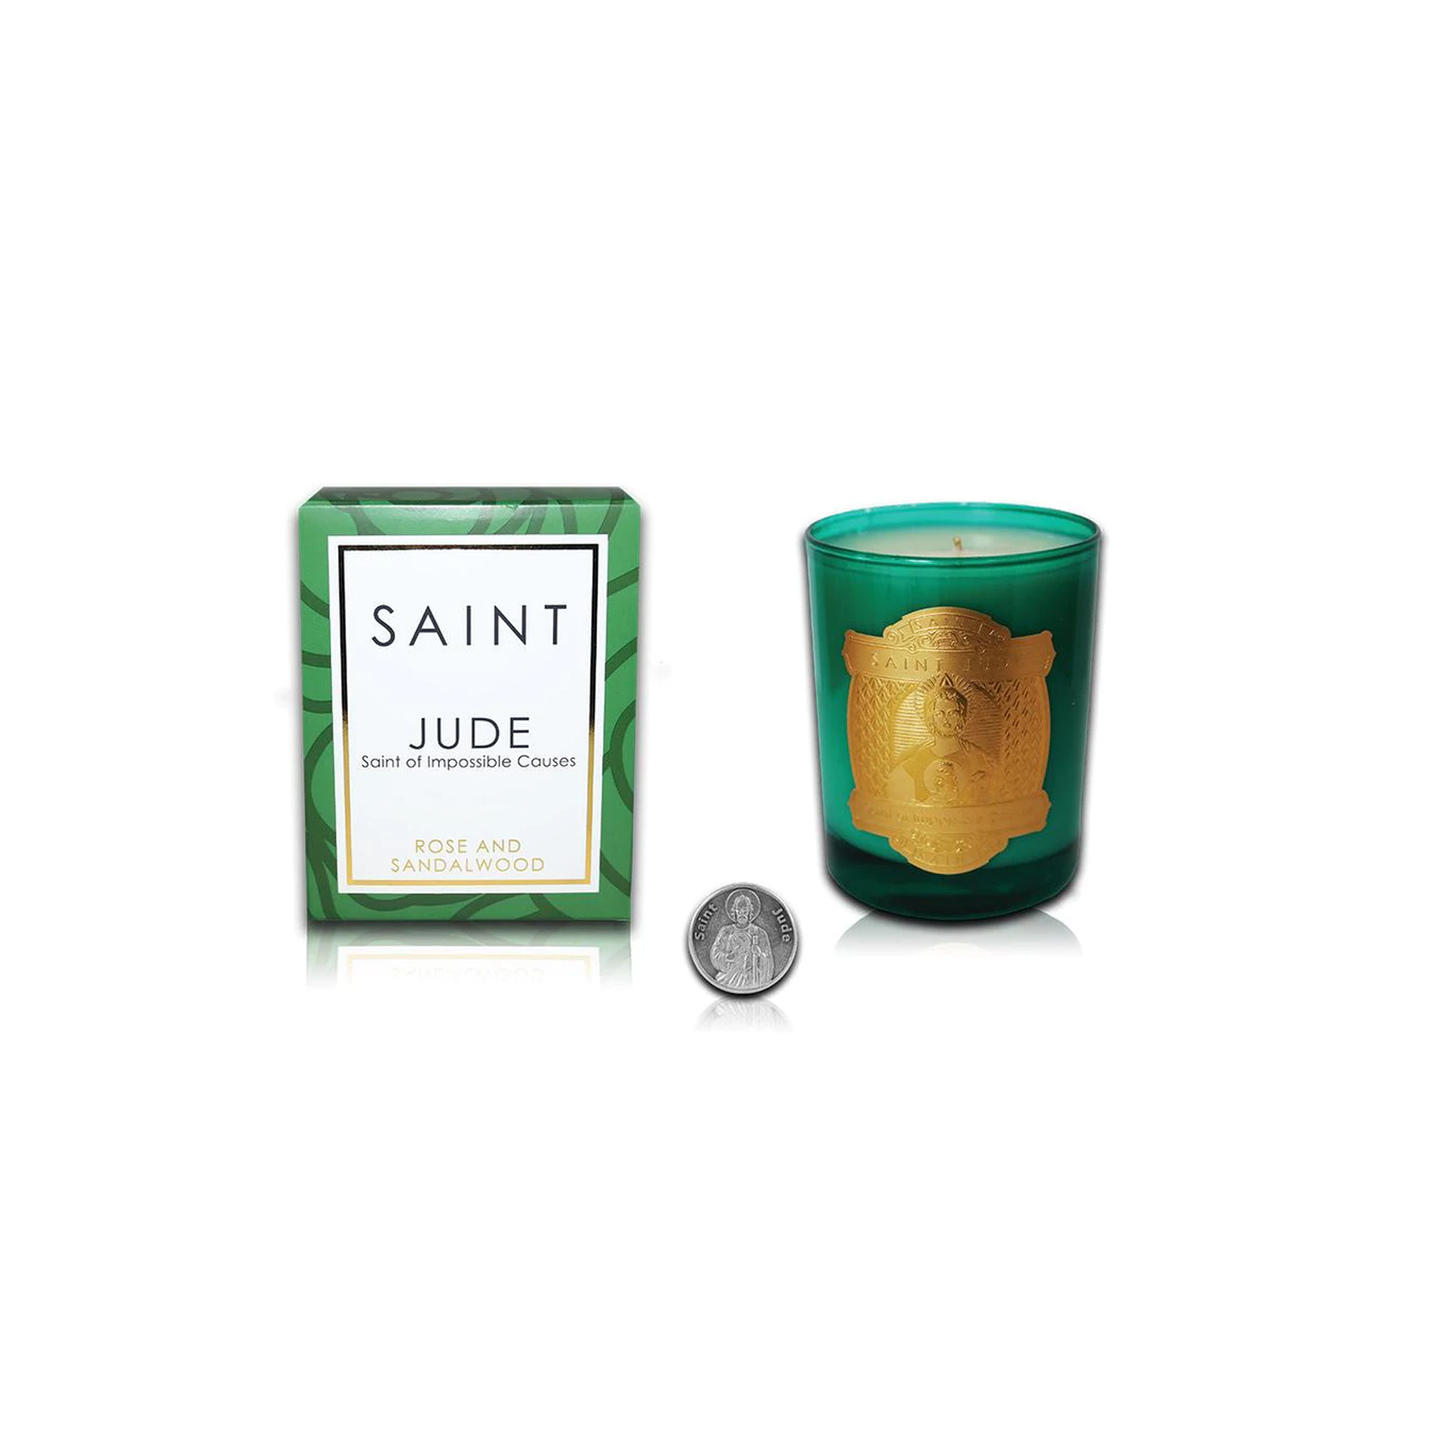 Saint Jude, 14oz Special Edition Candle